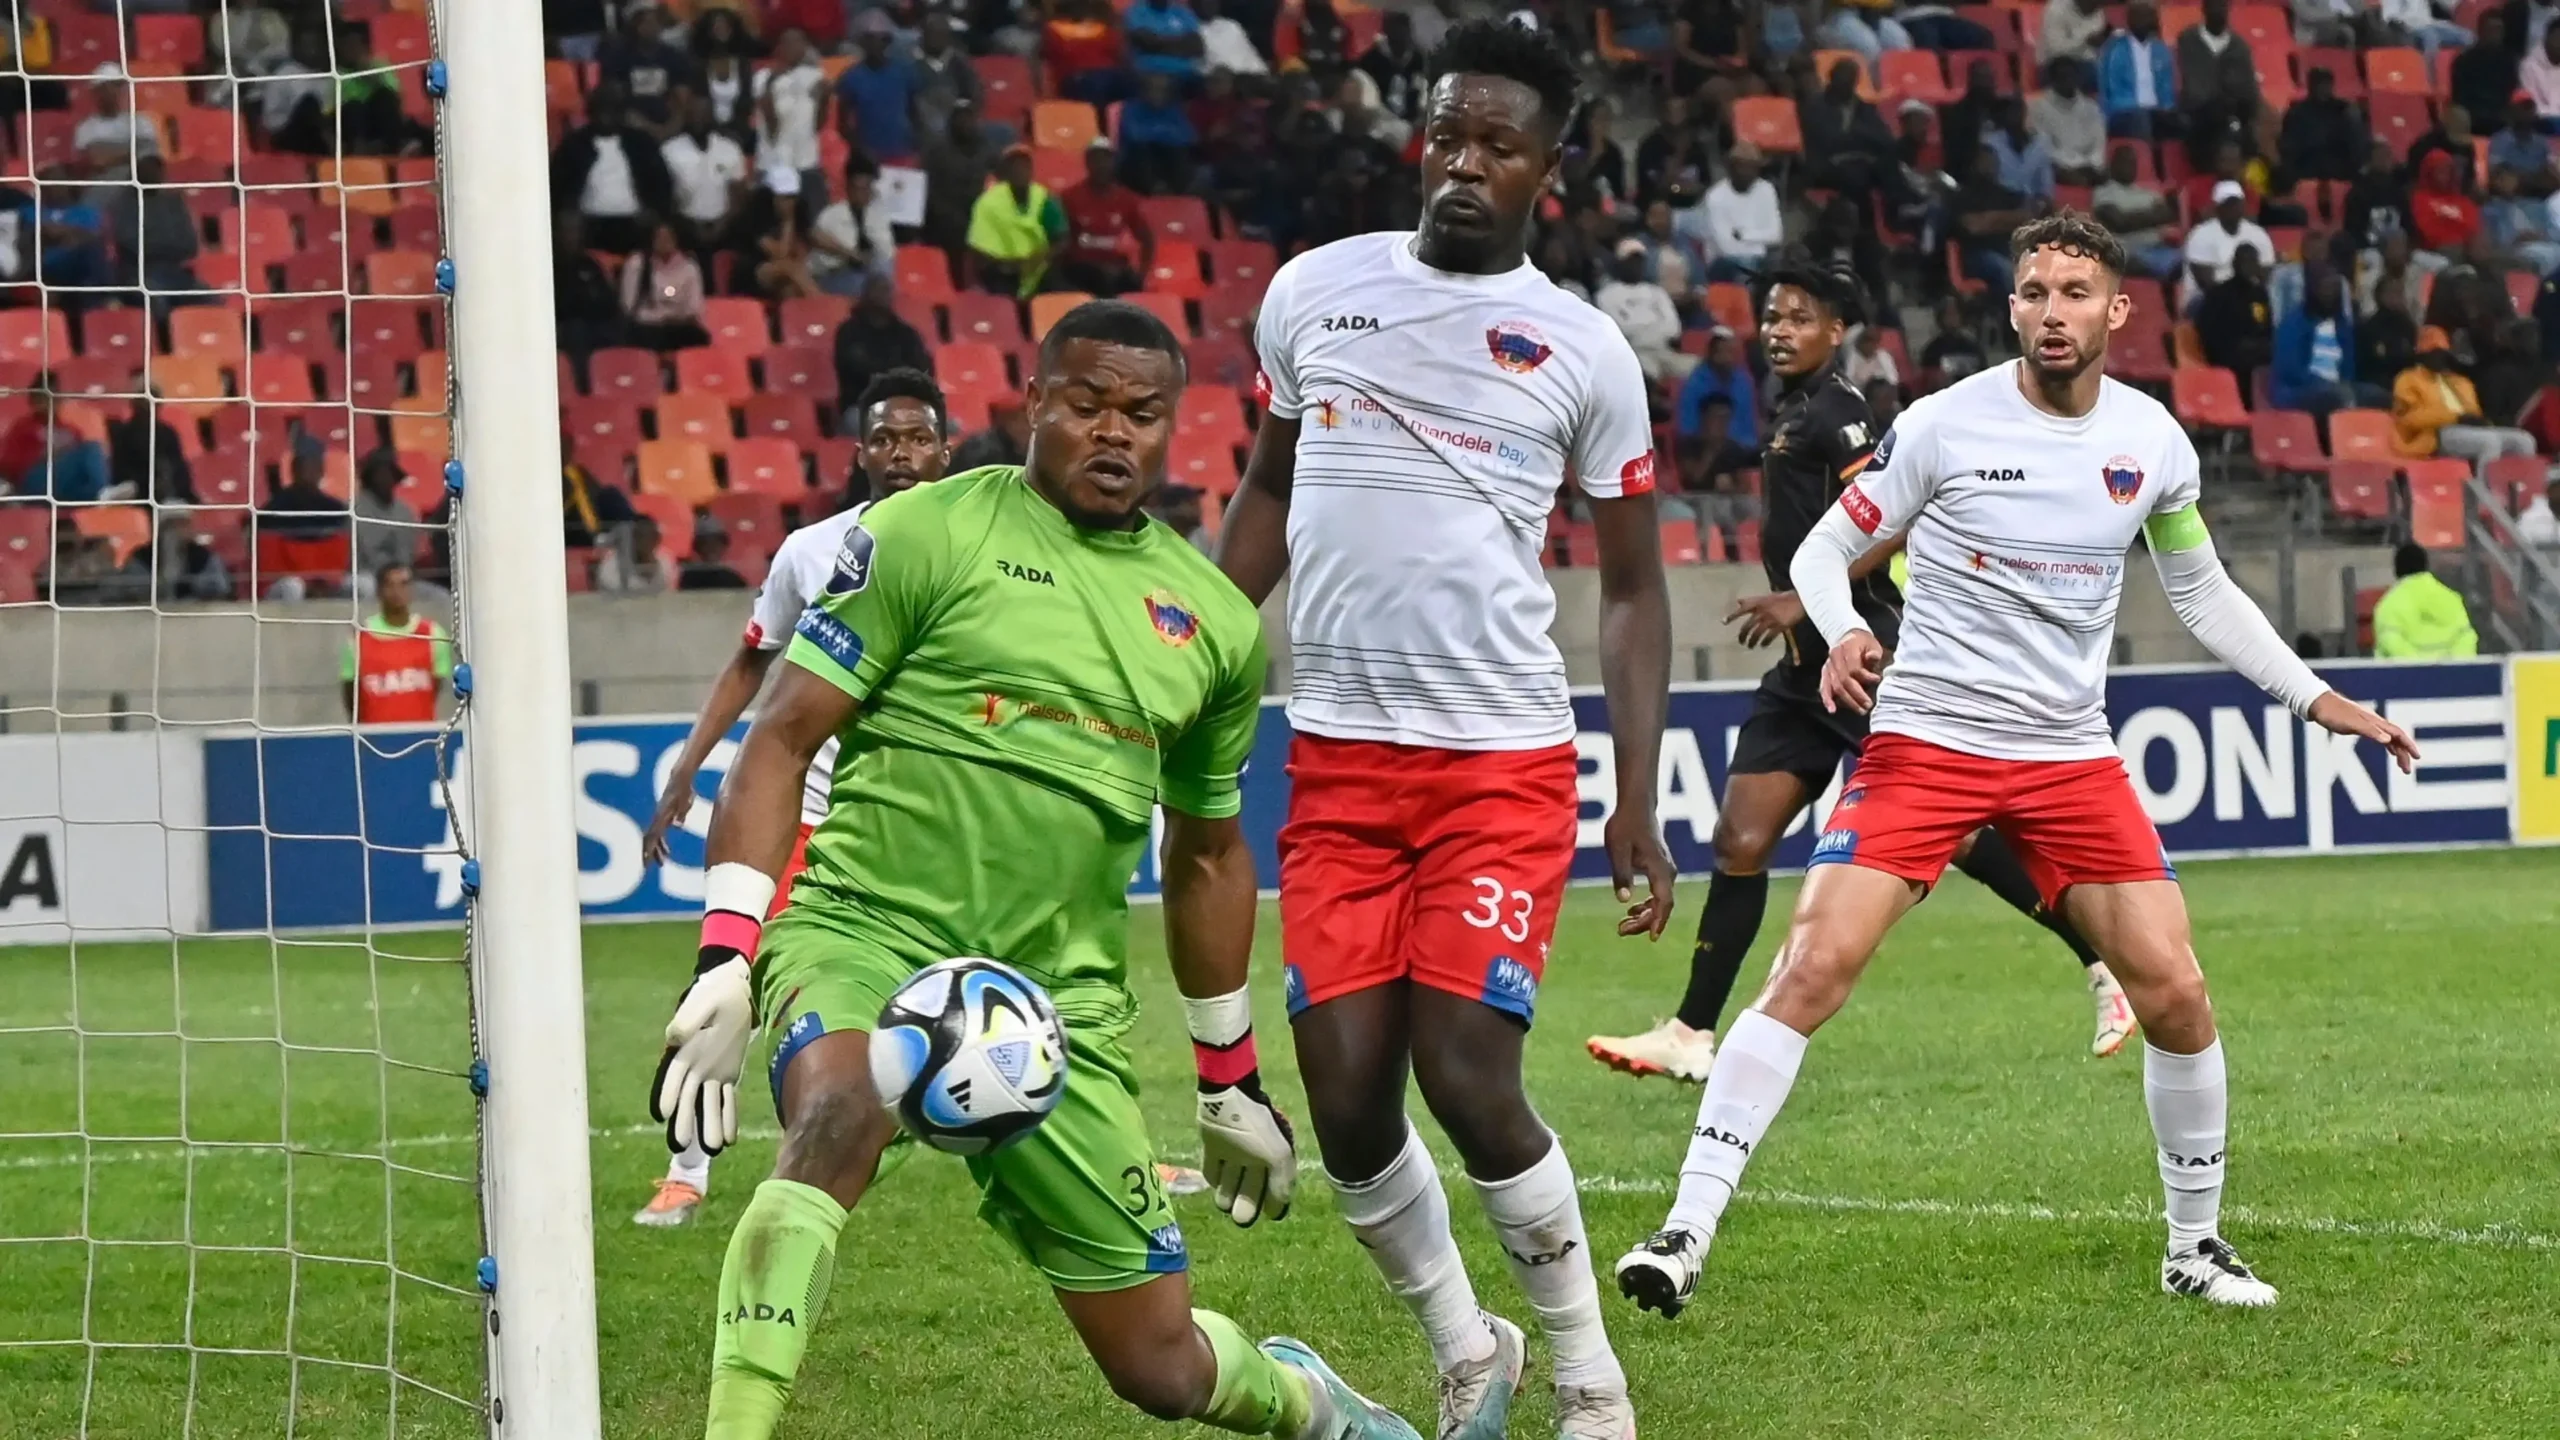 Underdog Chippa United sends a warning signal, expressing their intent to disrupt the possibility of an Orlando Pirates and Mamelodi Sundowns Nedbank Cup final.